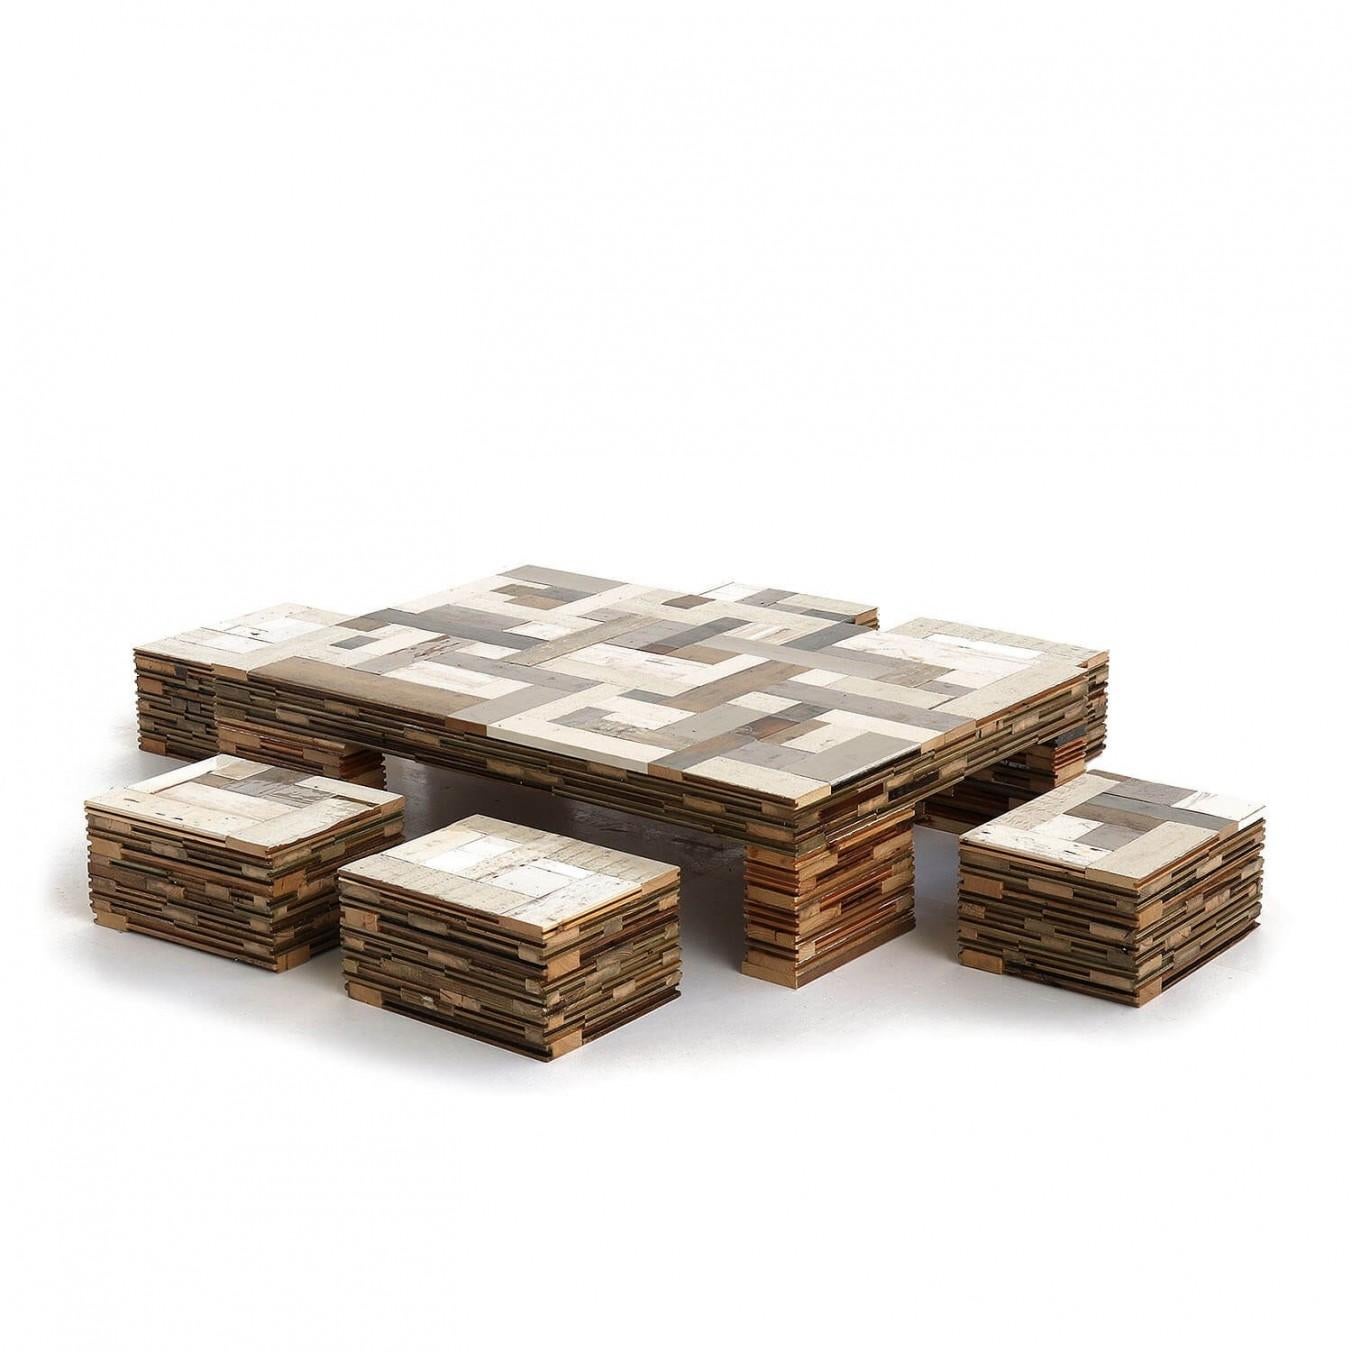 Wooden Coffee Table w/ 6 Stools, Waste Coffeecube in Scrapwood by Piet Hein Eek In New Condition For Sale In Warsaw, PL